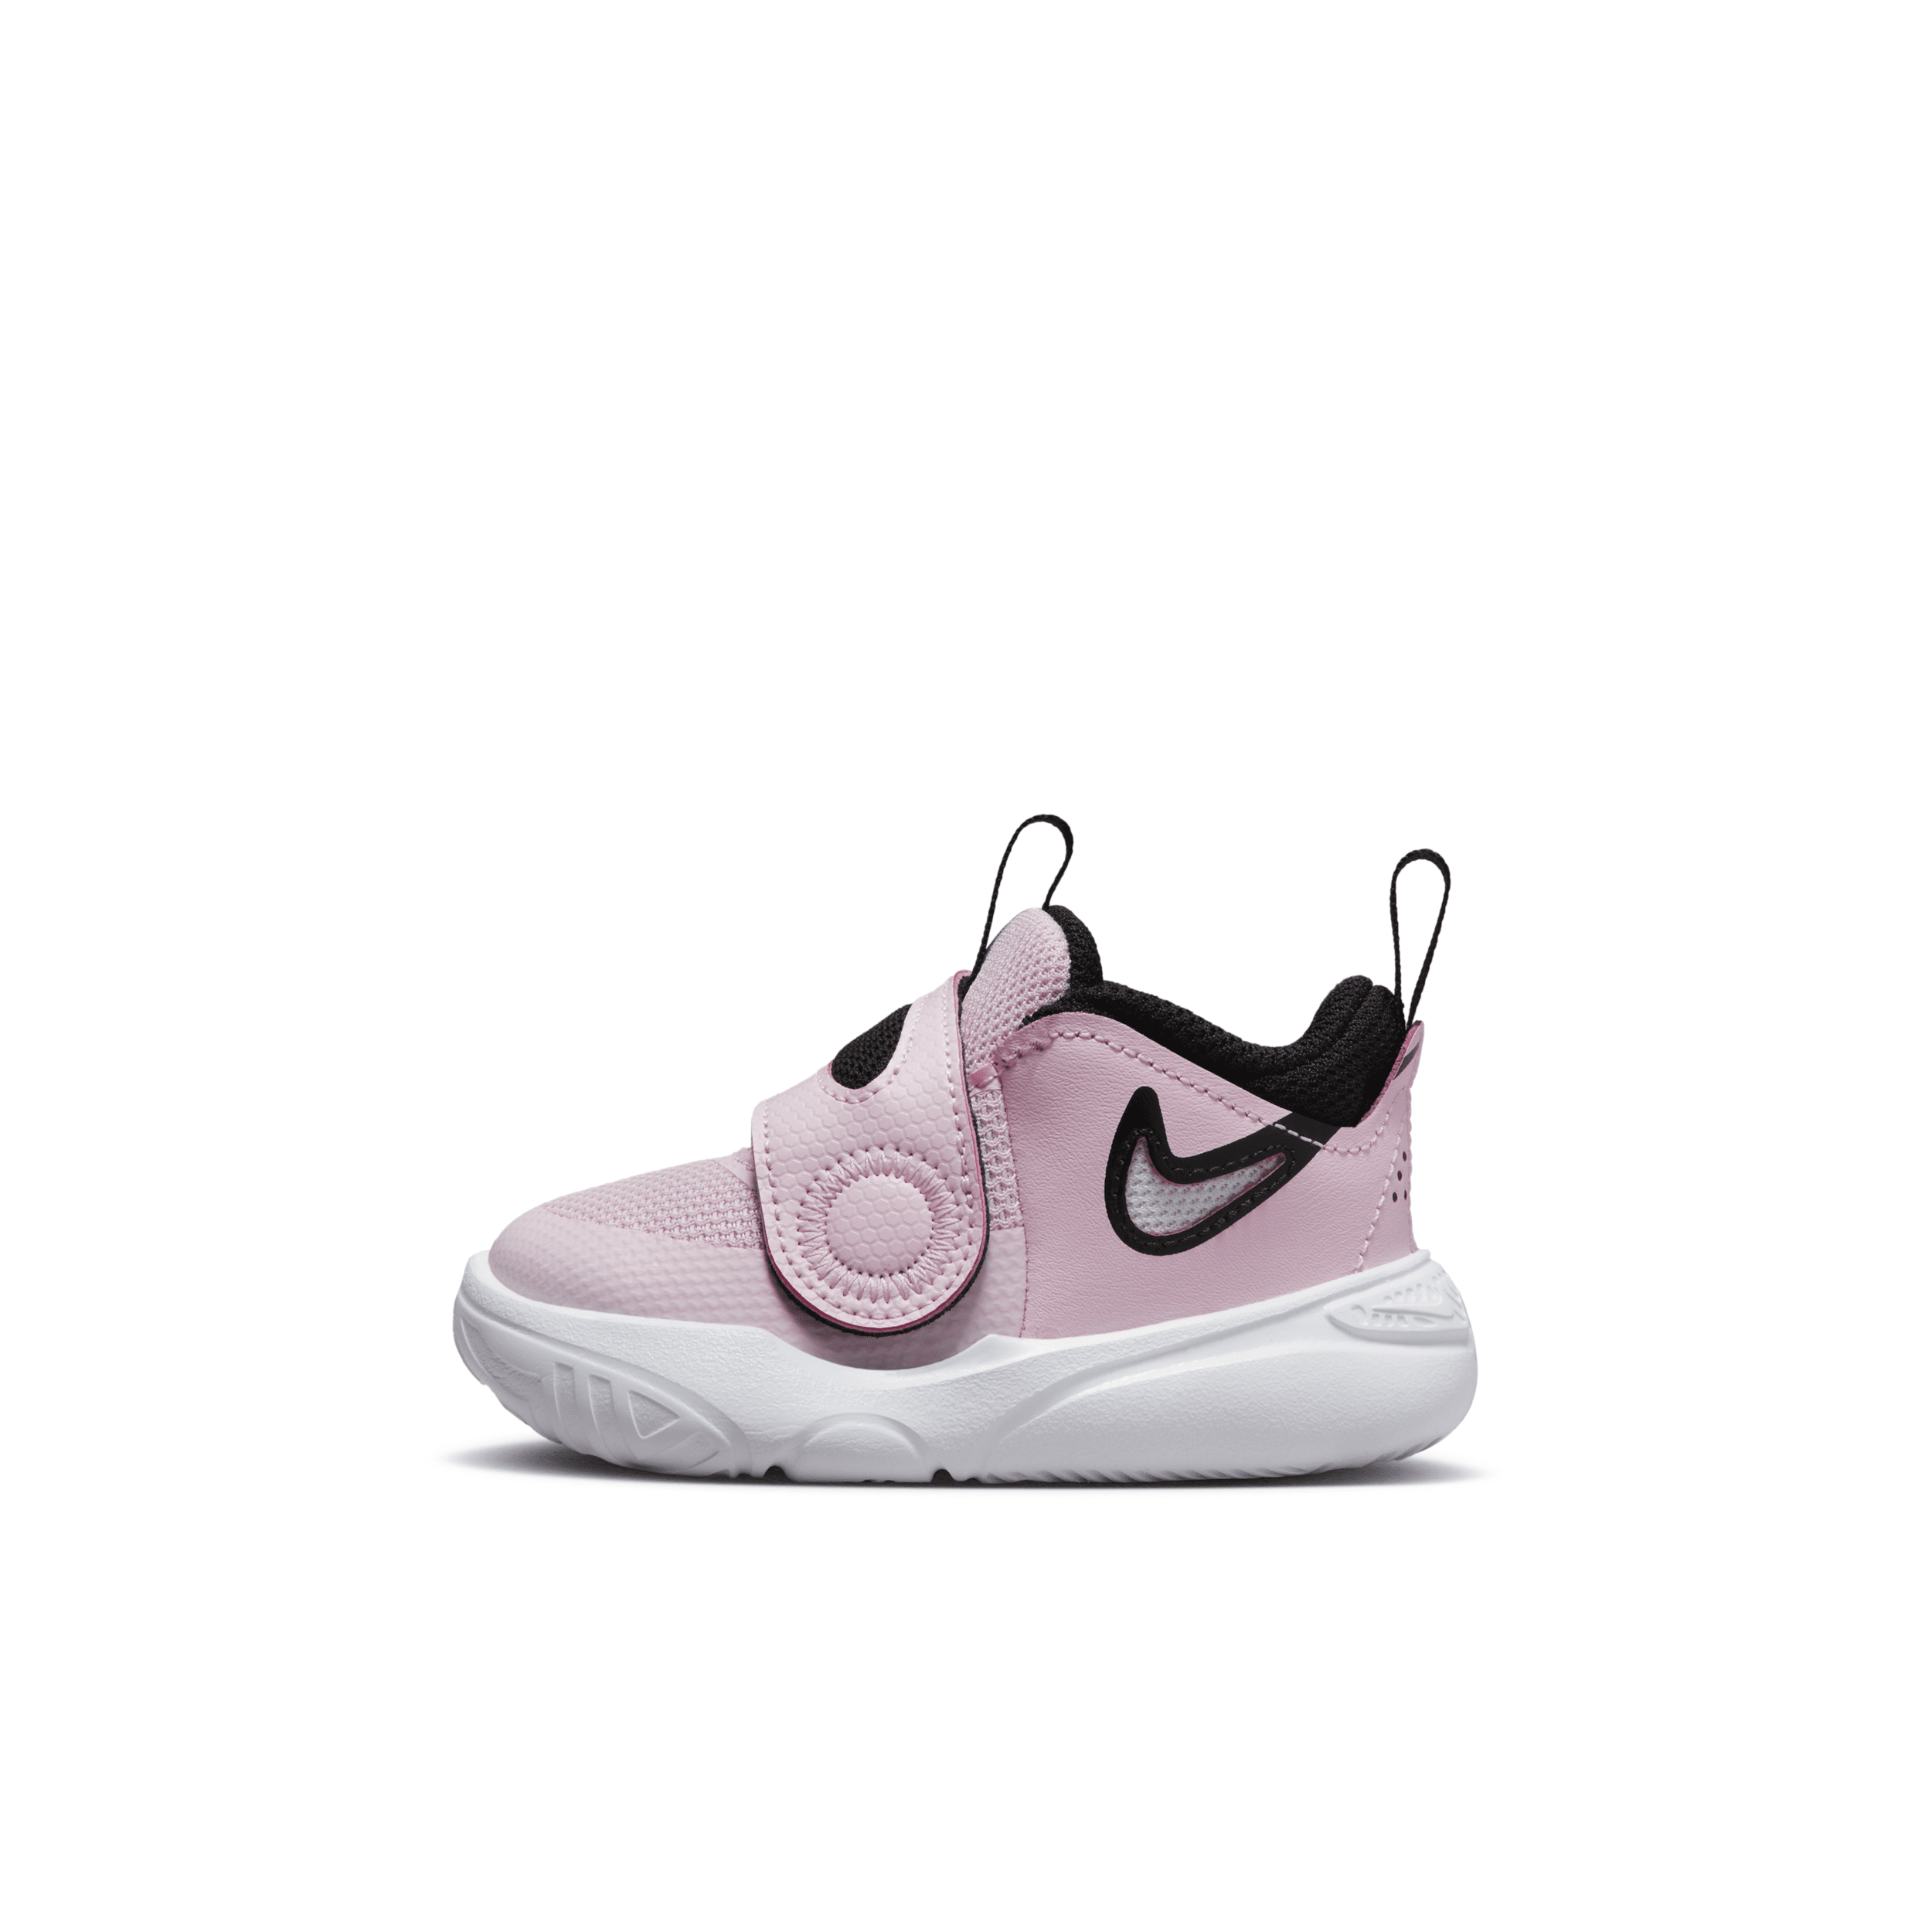 Nike Team Hustle D 11 Baby/toddler Shoes In Pink